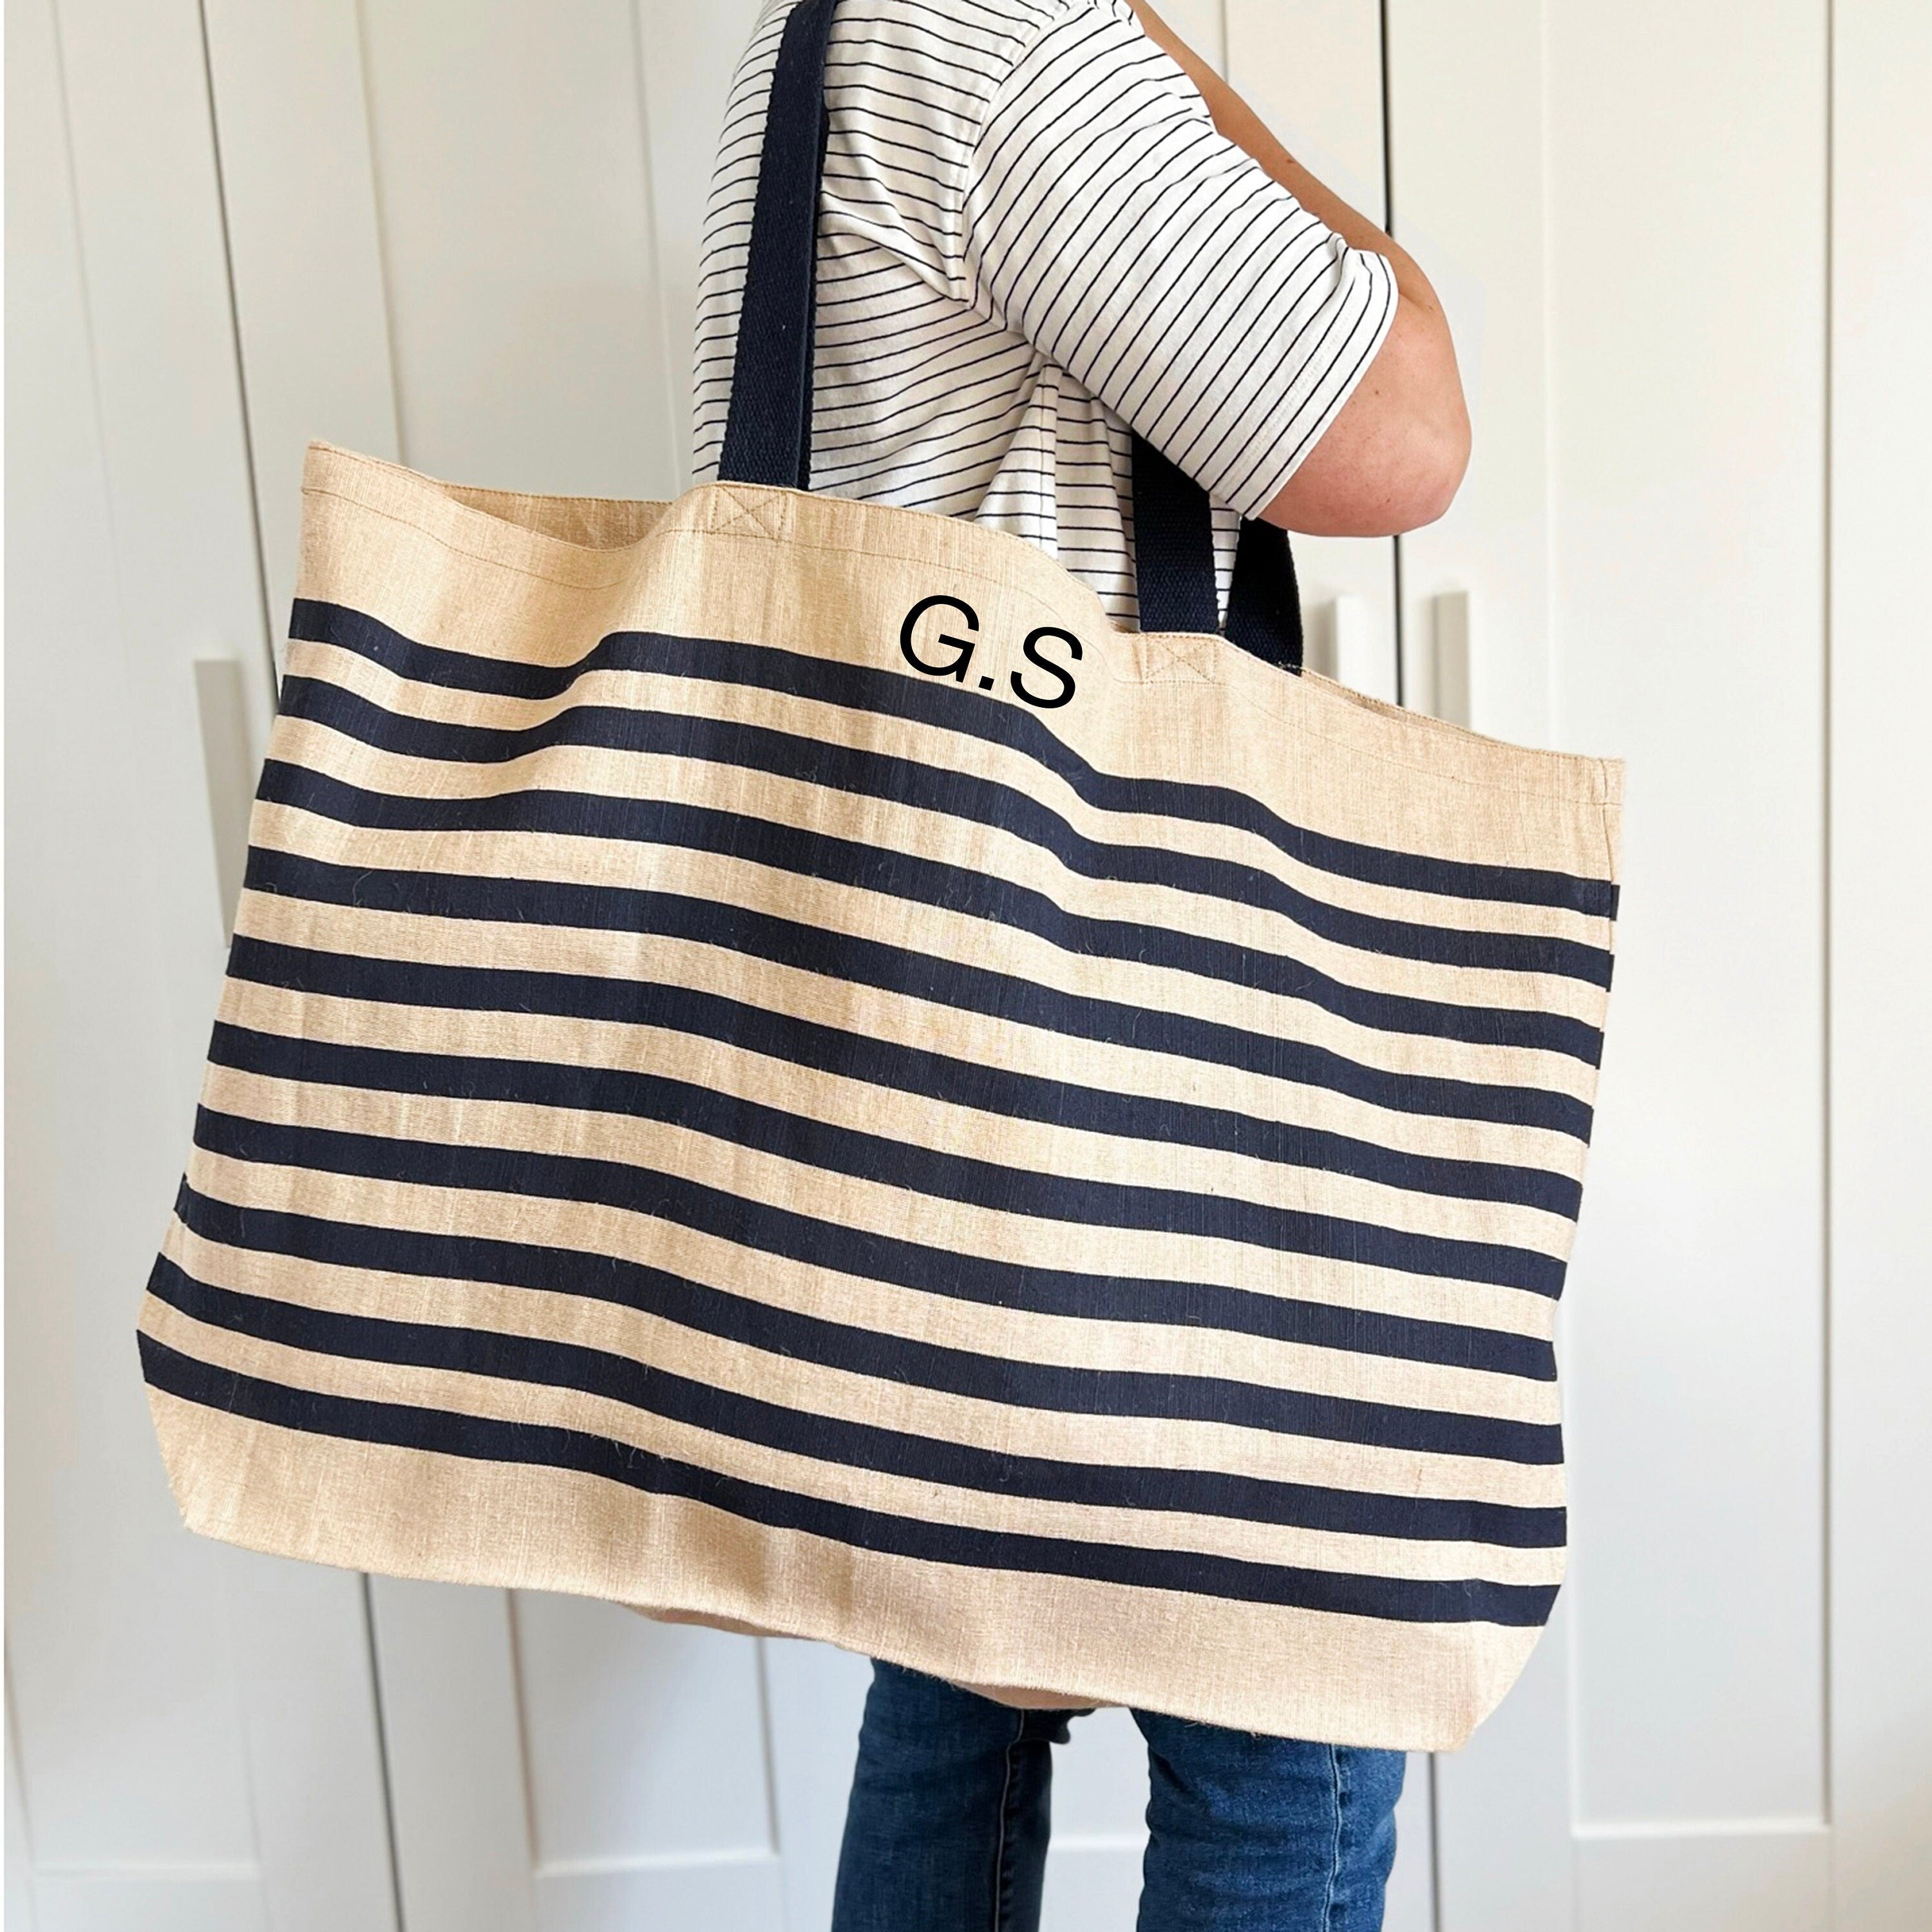 Personalised Beach Bag with Initials, NAVY Stripe,  Large Hold-all , Tote, Family Beach Bag, Big Shopping Bag, Swimming Bag, Groceries